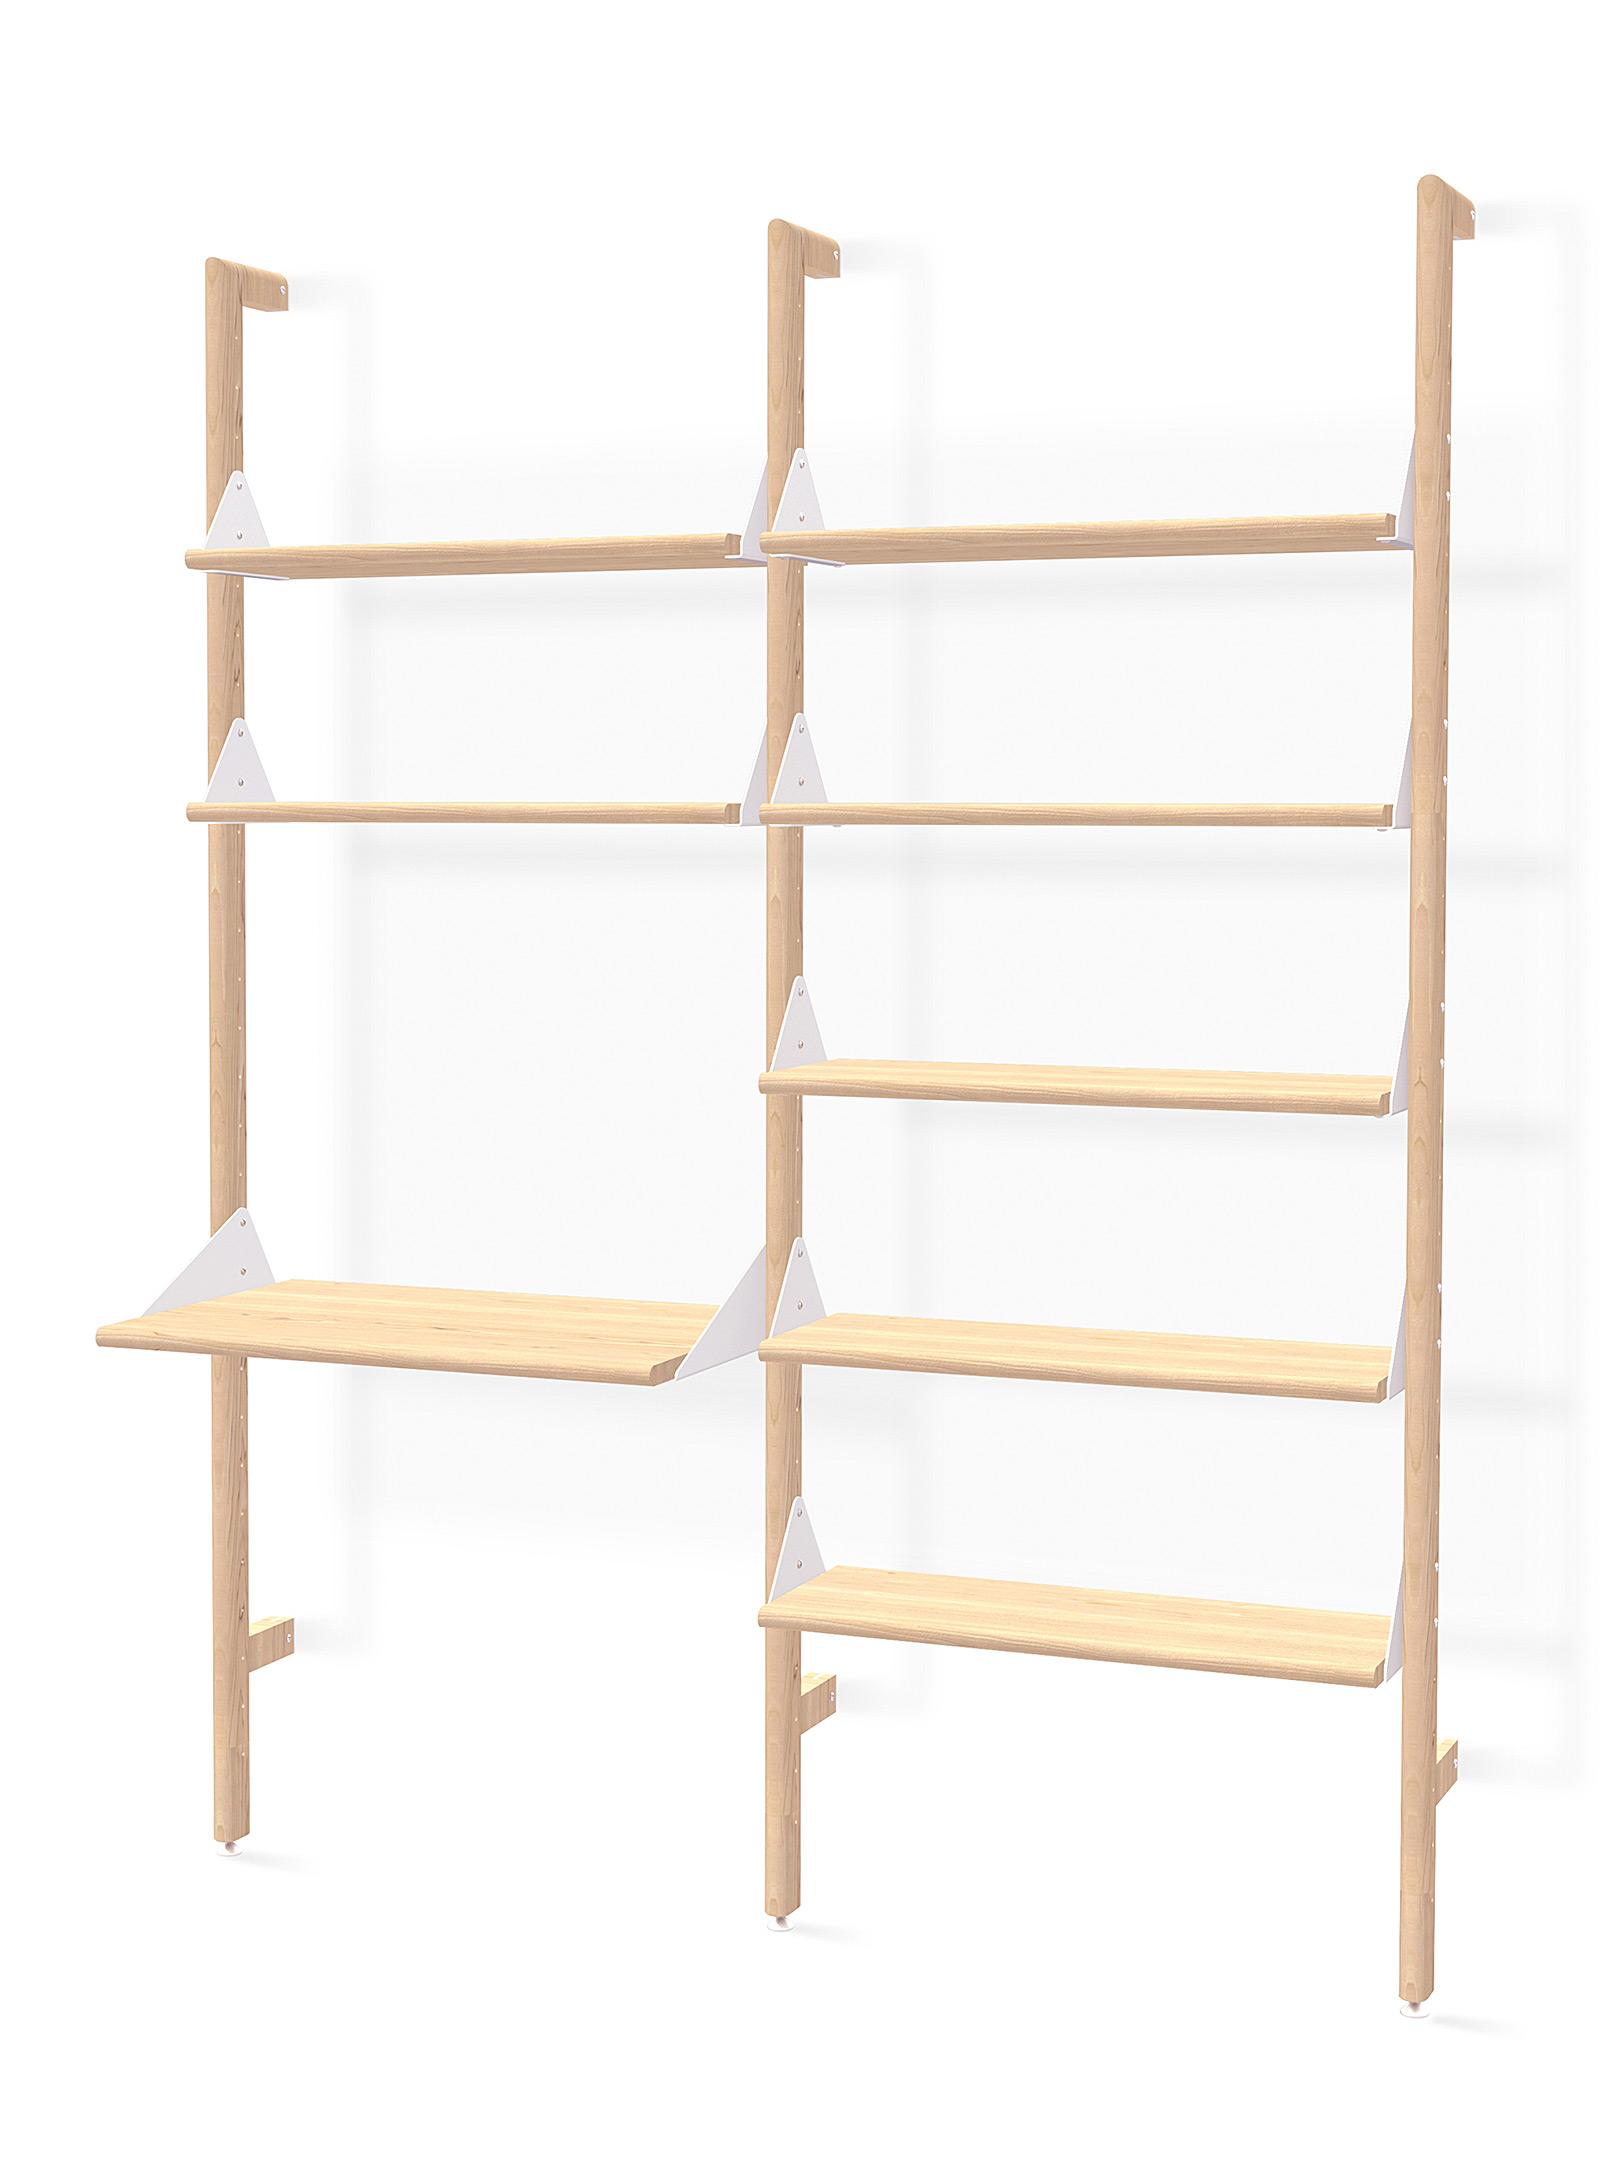 Gus Wood And Metal Double Shelf With Desktop In Assorted